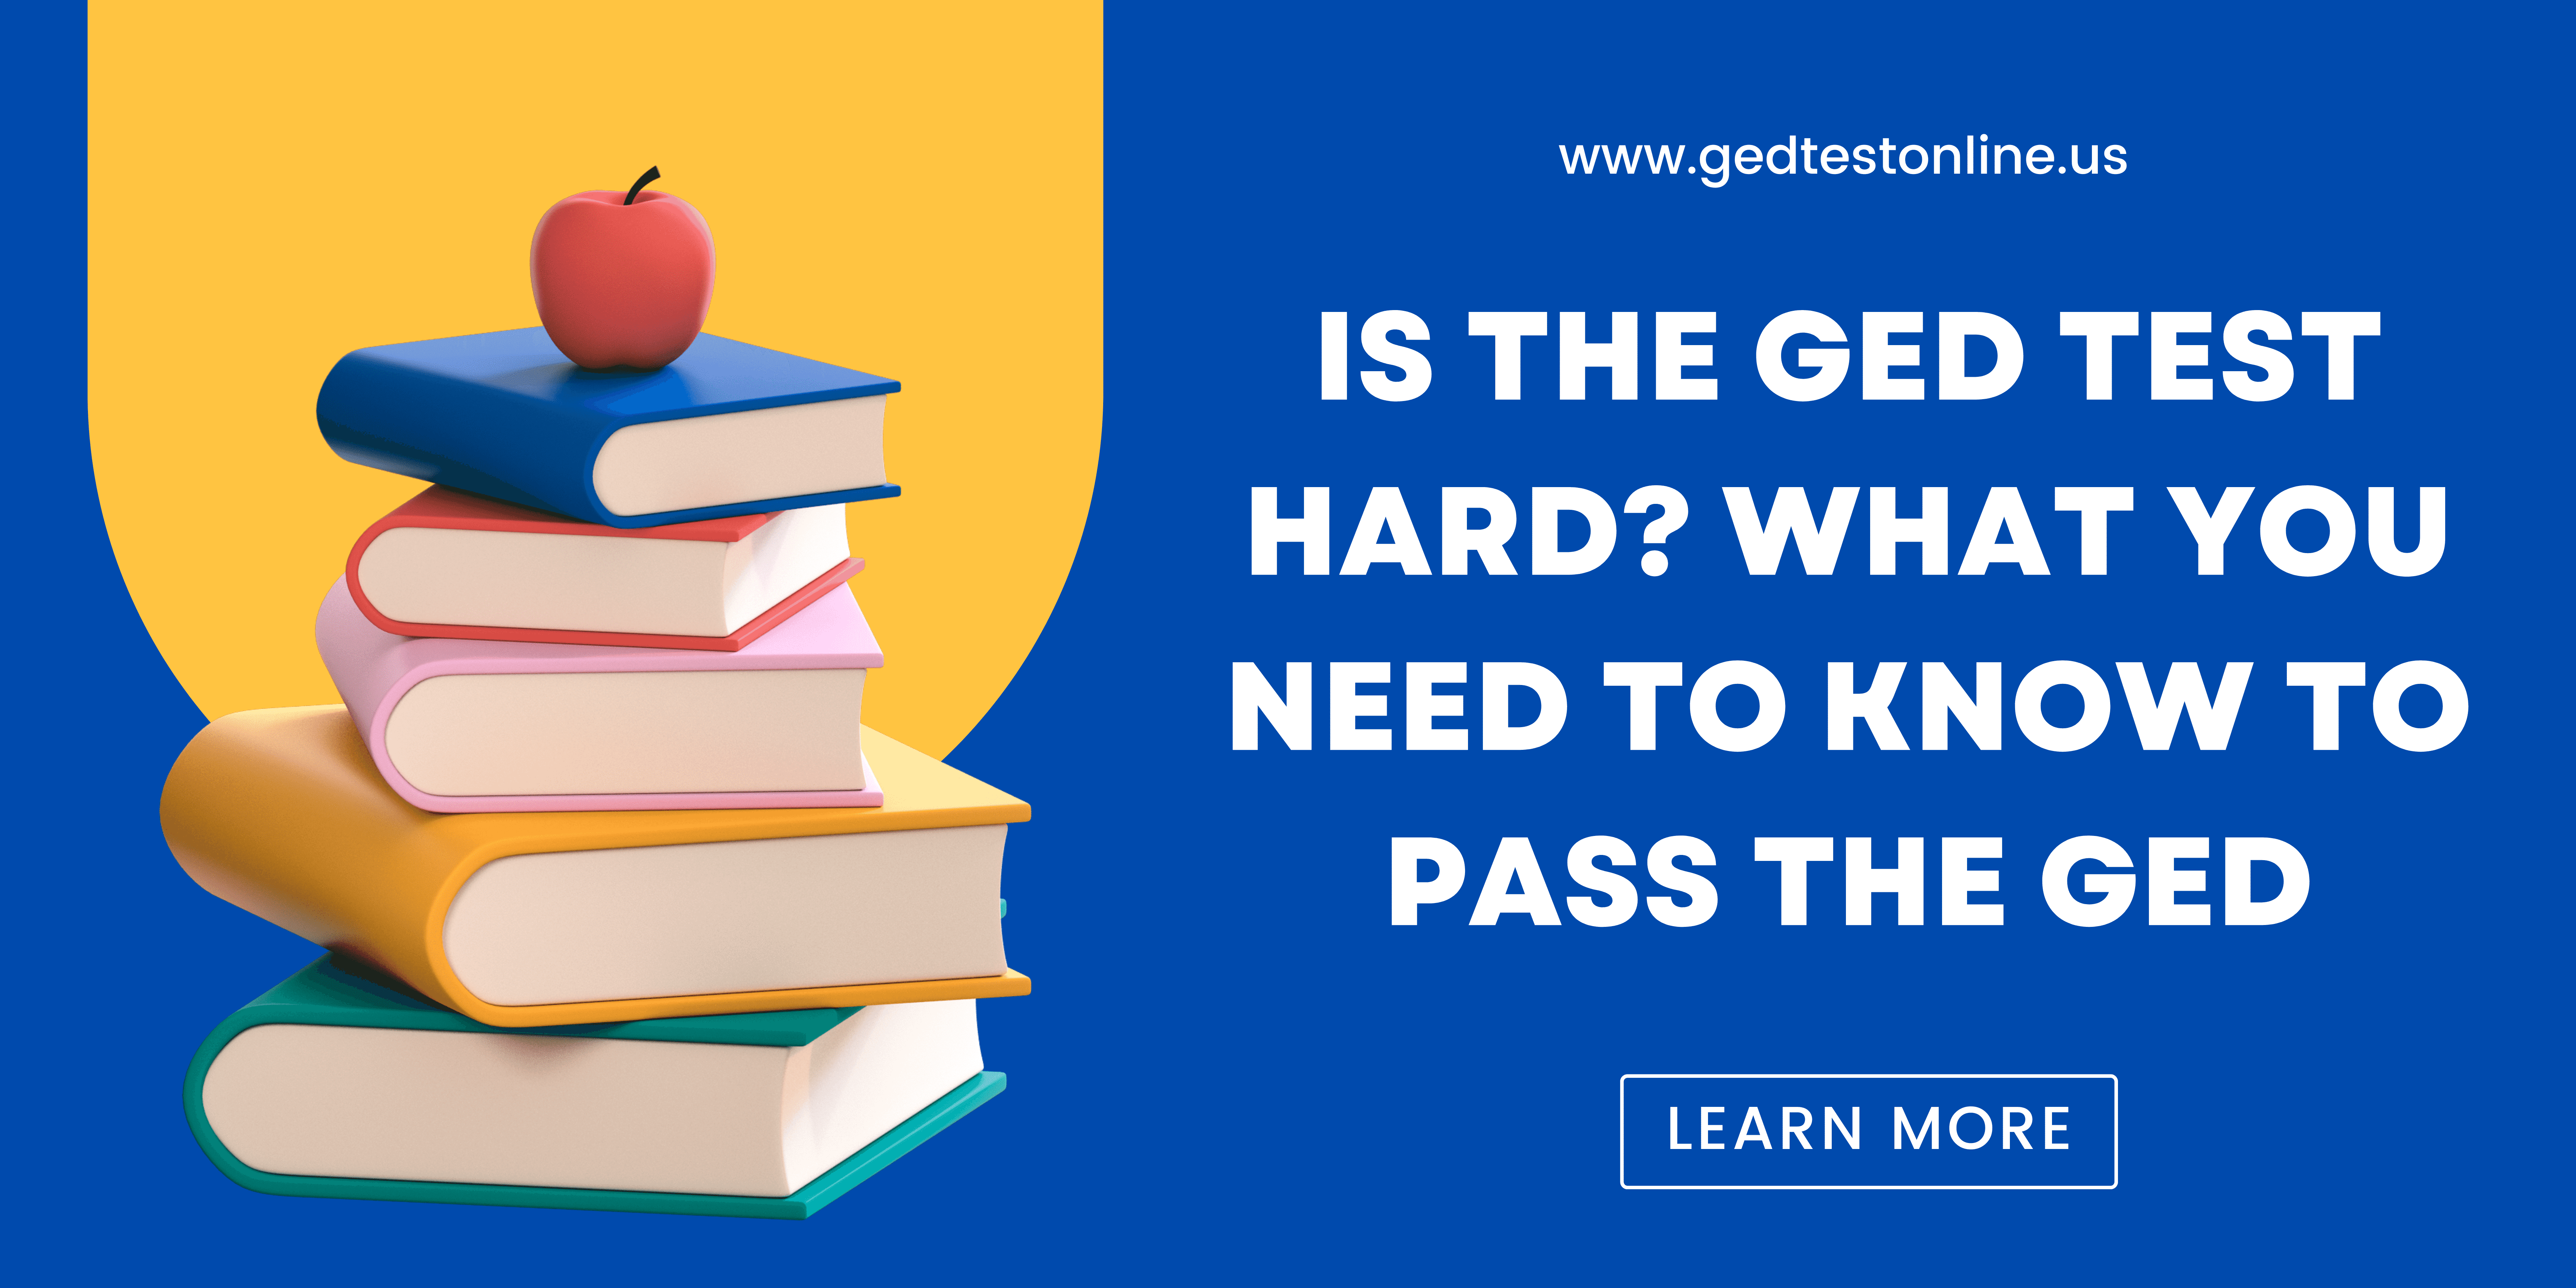 Is the GED Test Hard? What You Need to Know to Pass the GED